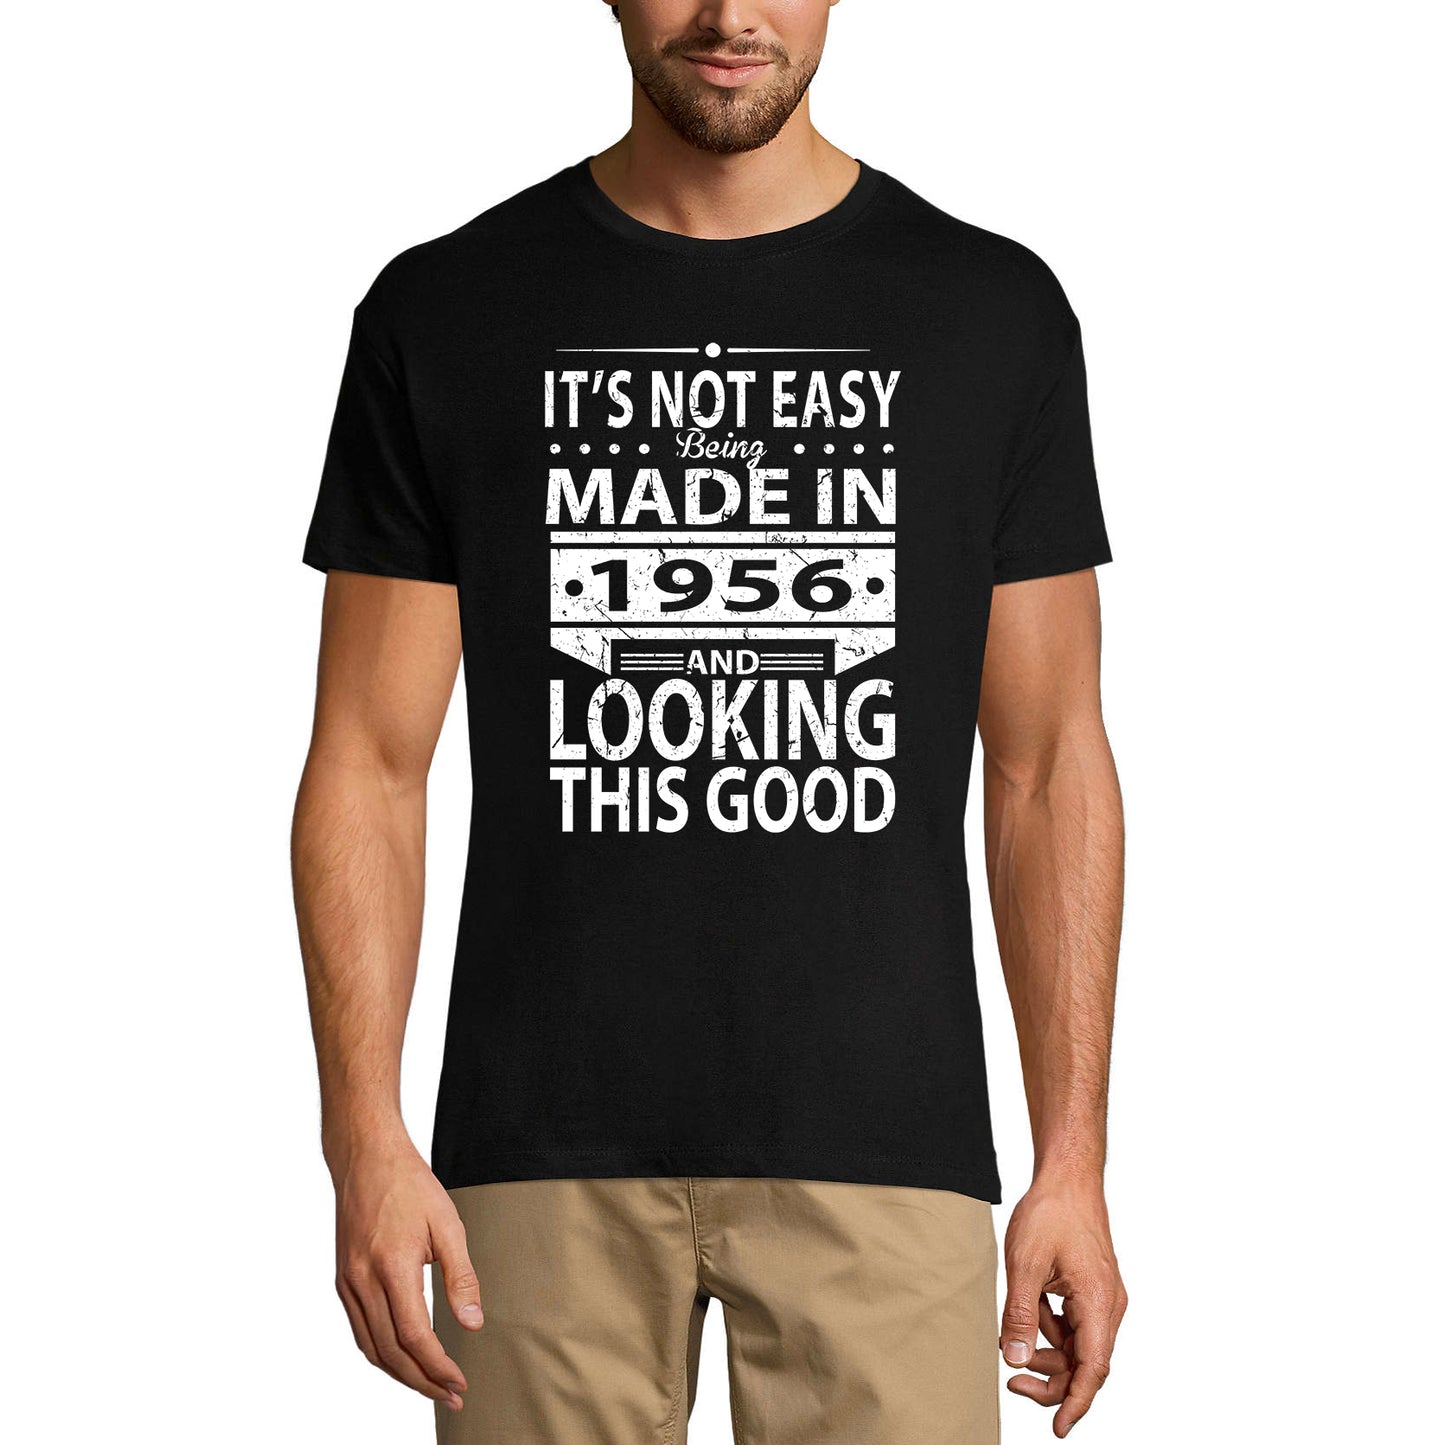 ULTRABASIC Men's T-Shirt Vintage Made in 1956 It's Not Easy Looking This Good - 64th Birthday Gift Tee Shirt